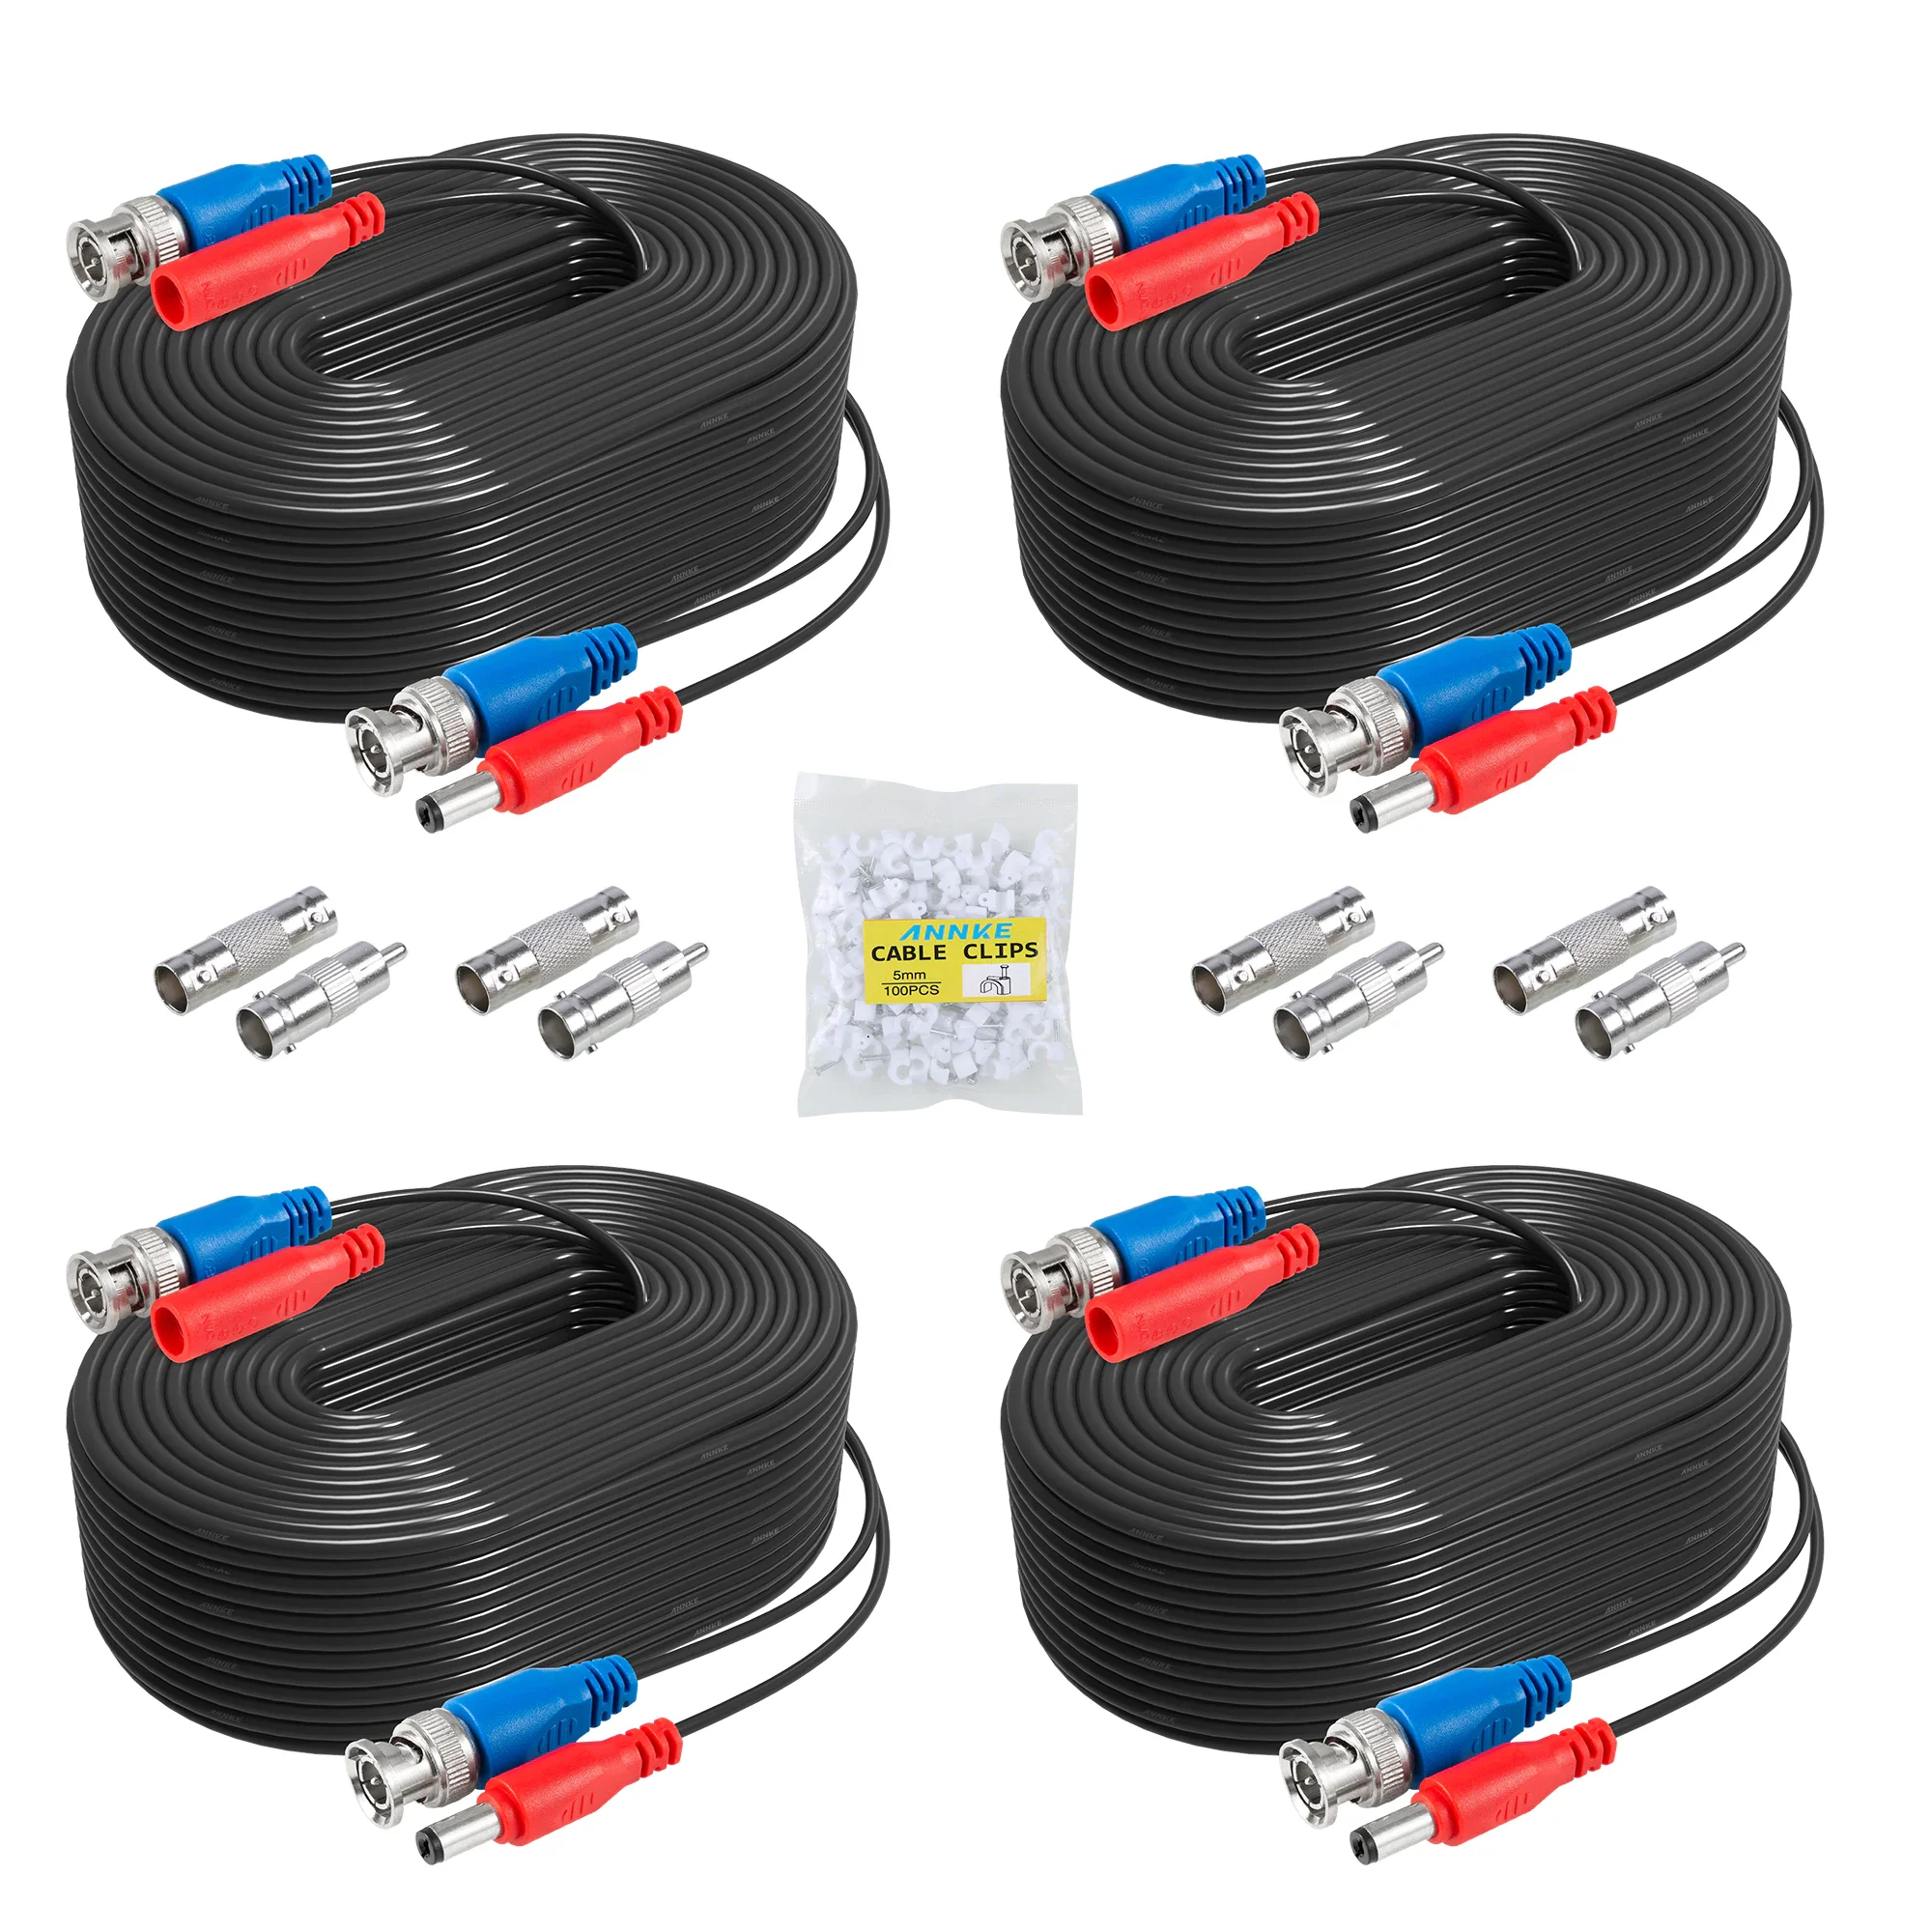 ANNKE 4X100ft 30M Security Camera Video Power Cable Cord BNC